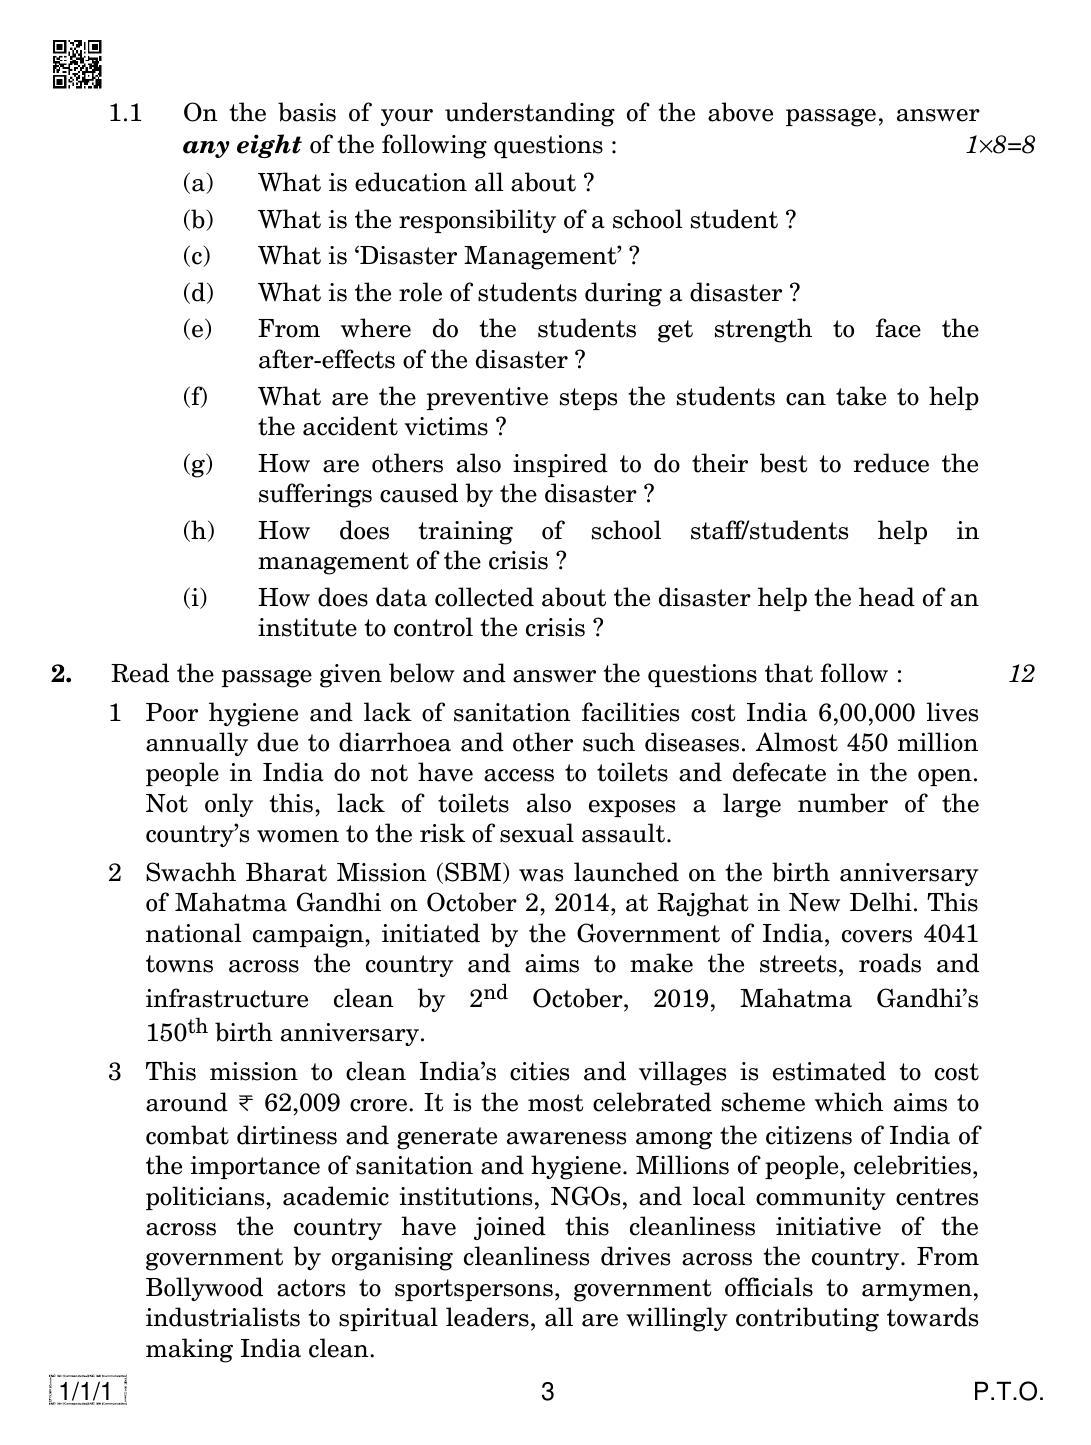 CBSE Class 10 1-1-1 ENGLISH COMM. 2019 Compartment Question Paper - Page 3